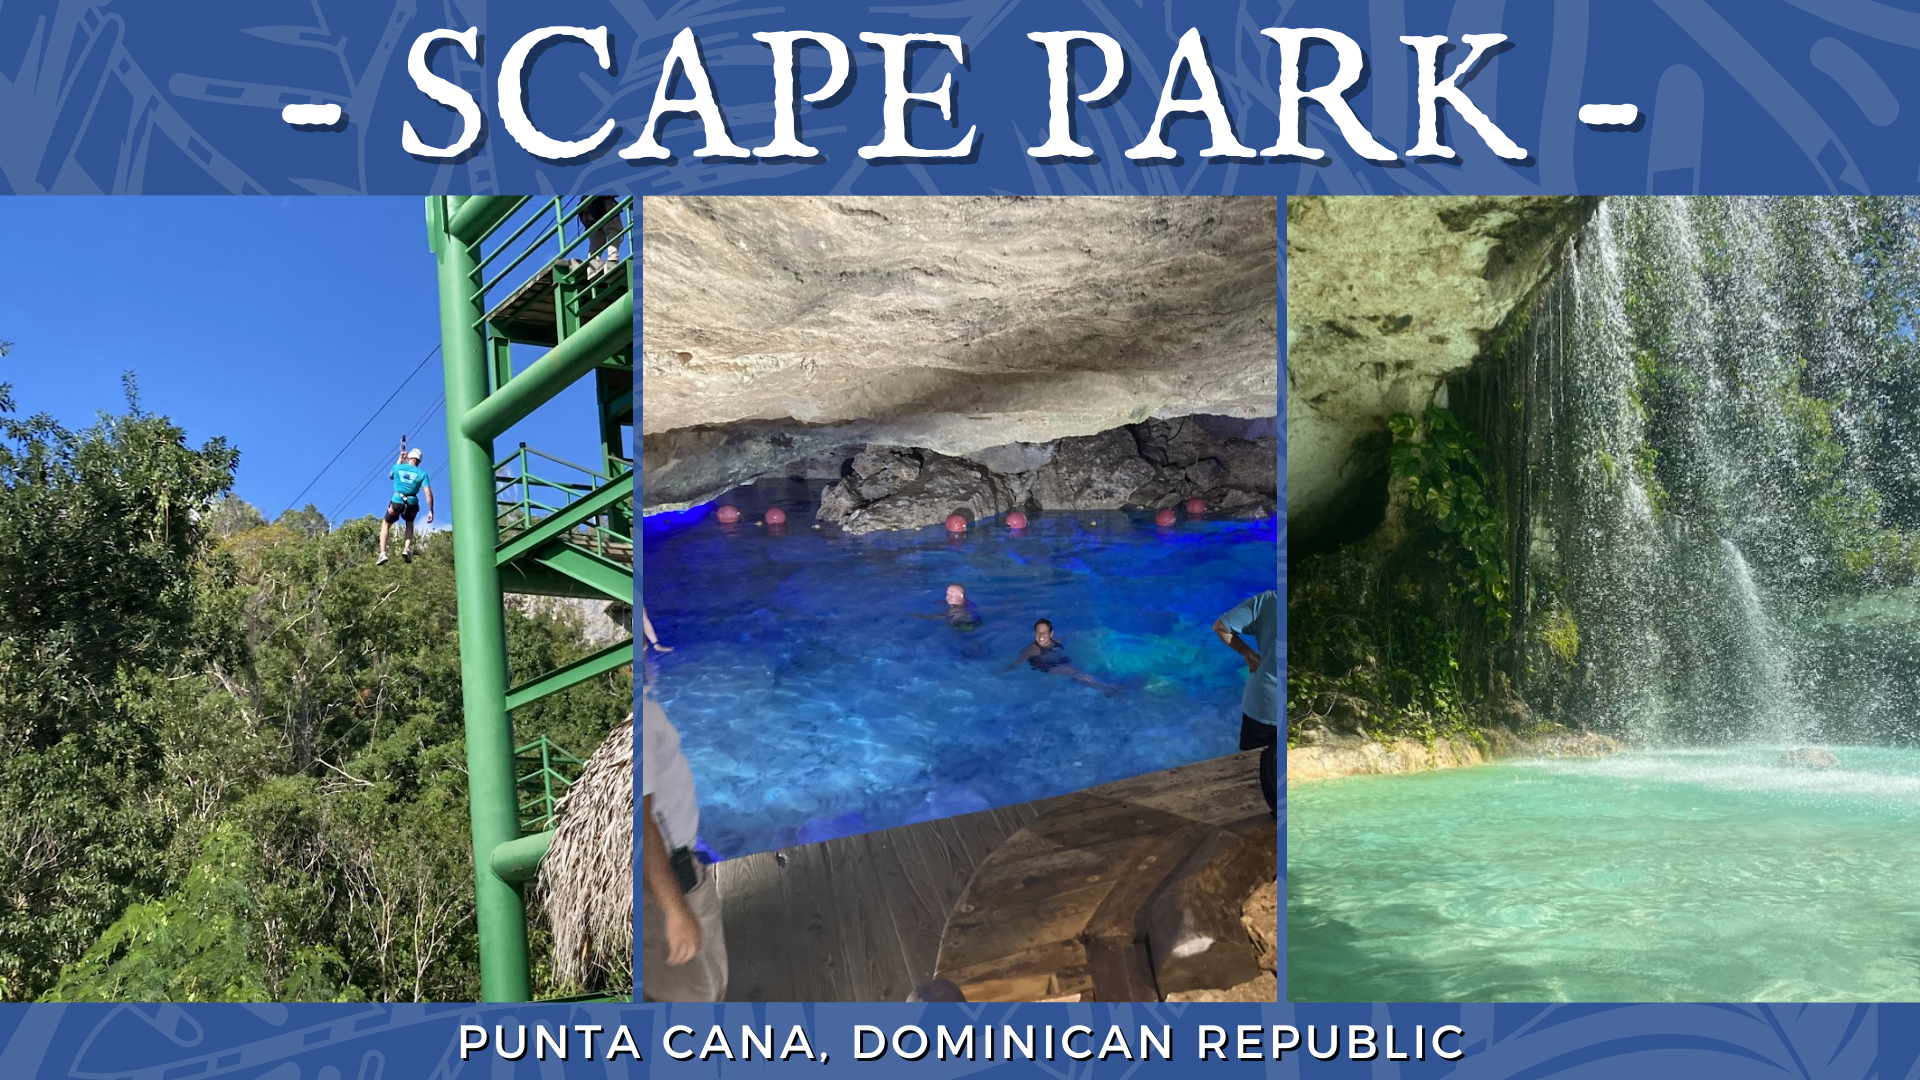 Scape Park Punta Cana - Unforgettable Way to Spend the Day